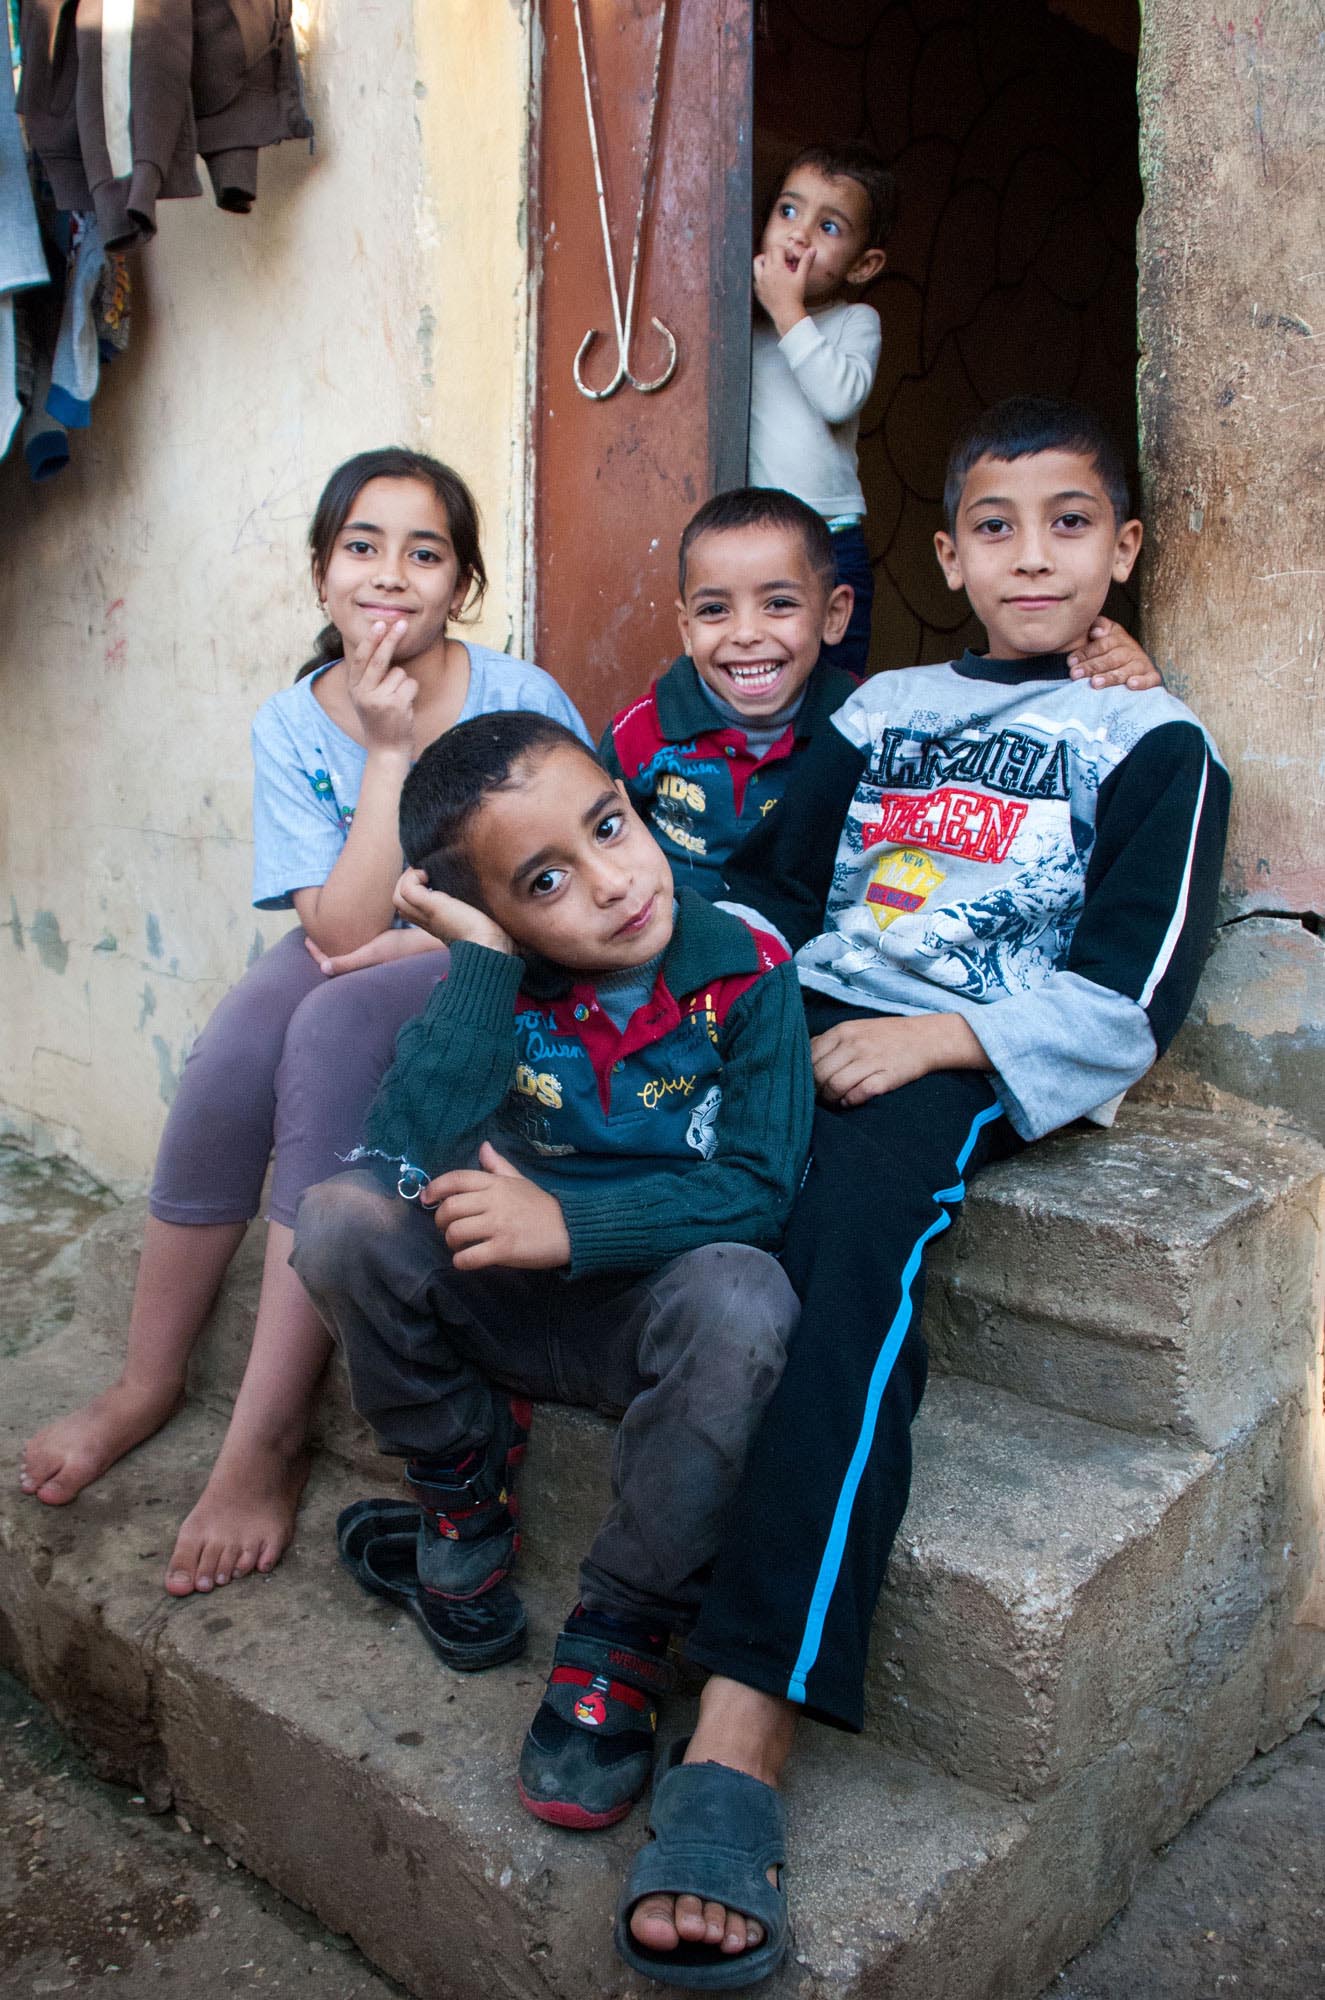 Children in a Palestinian refugee camp in Lebanon.